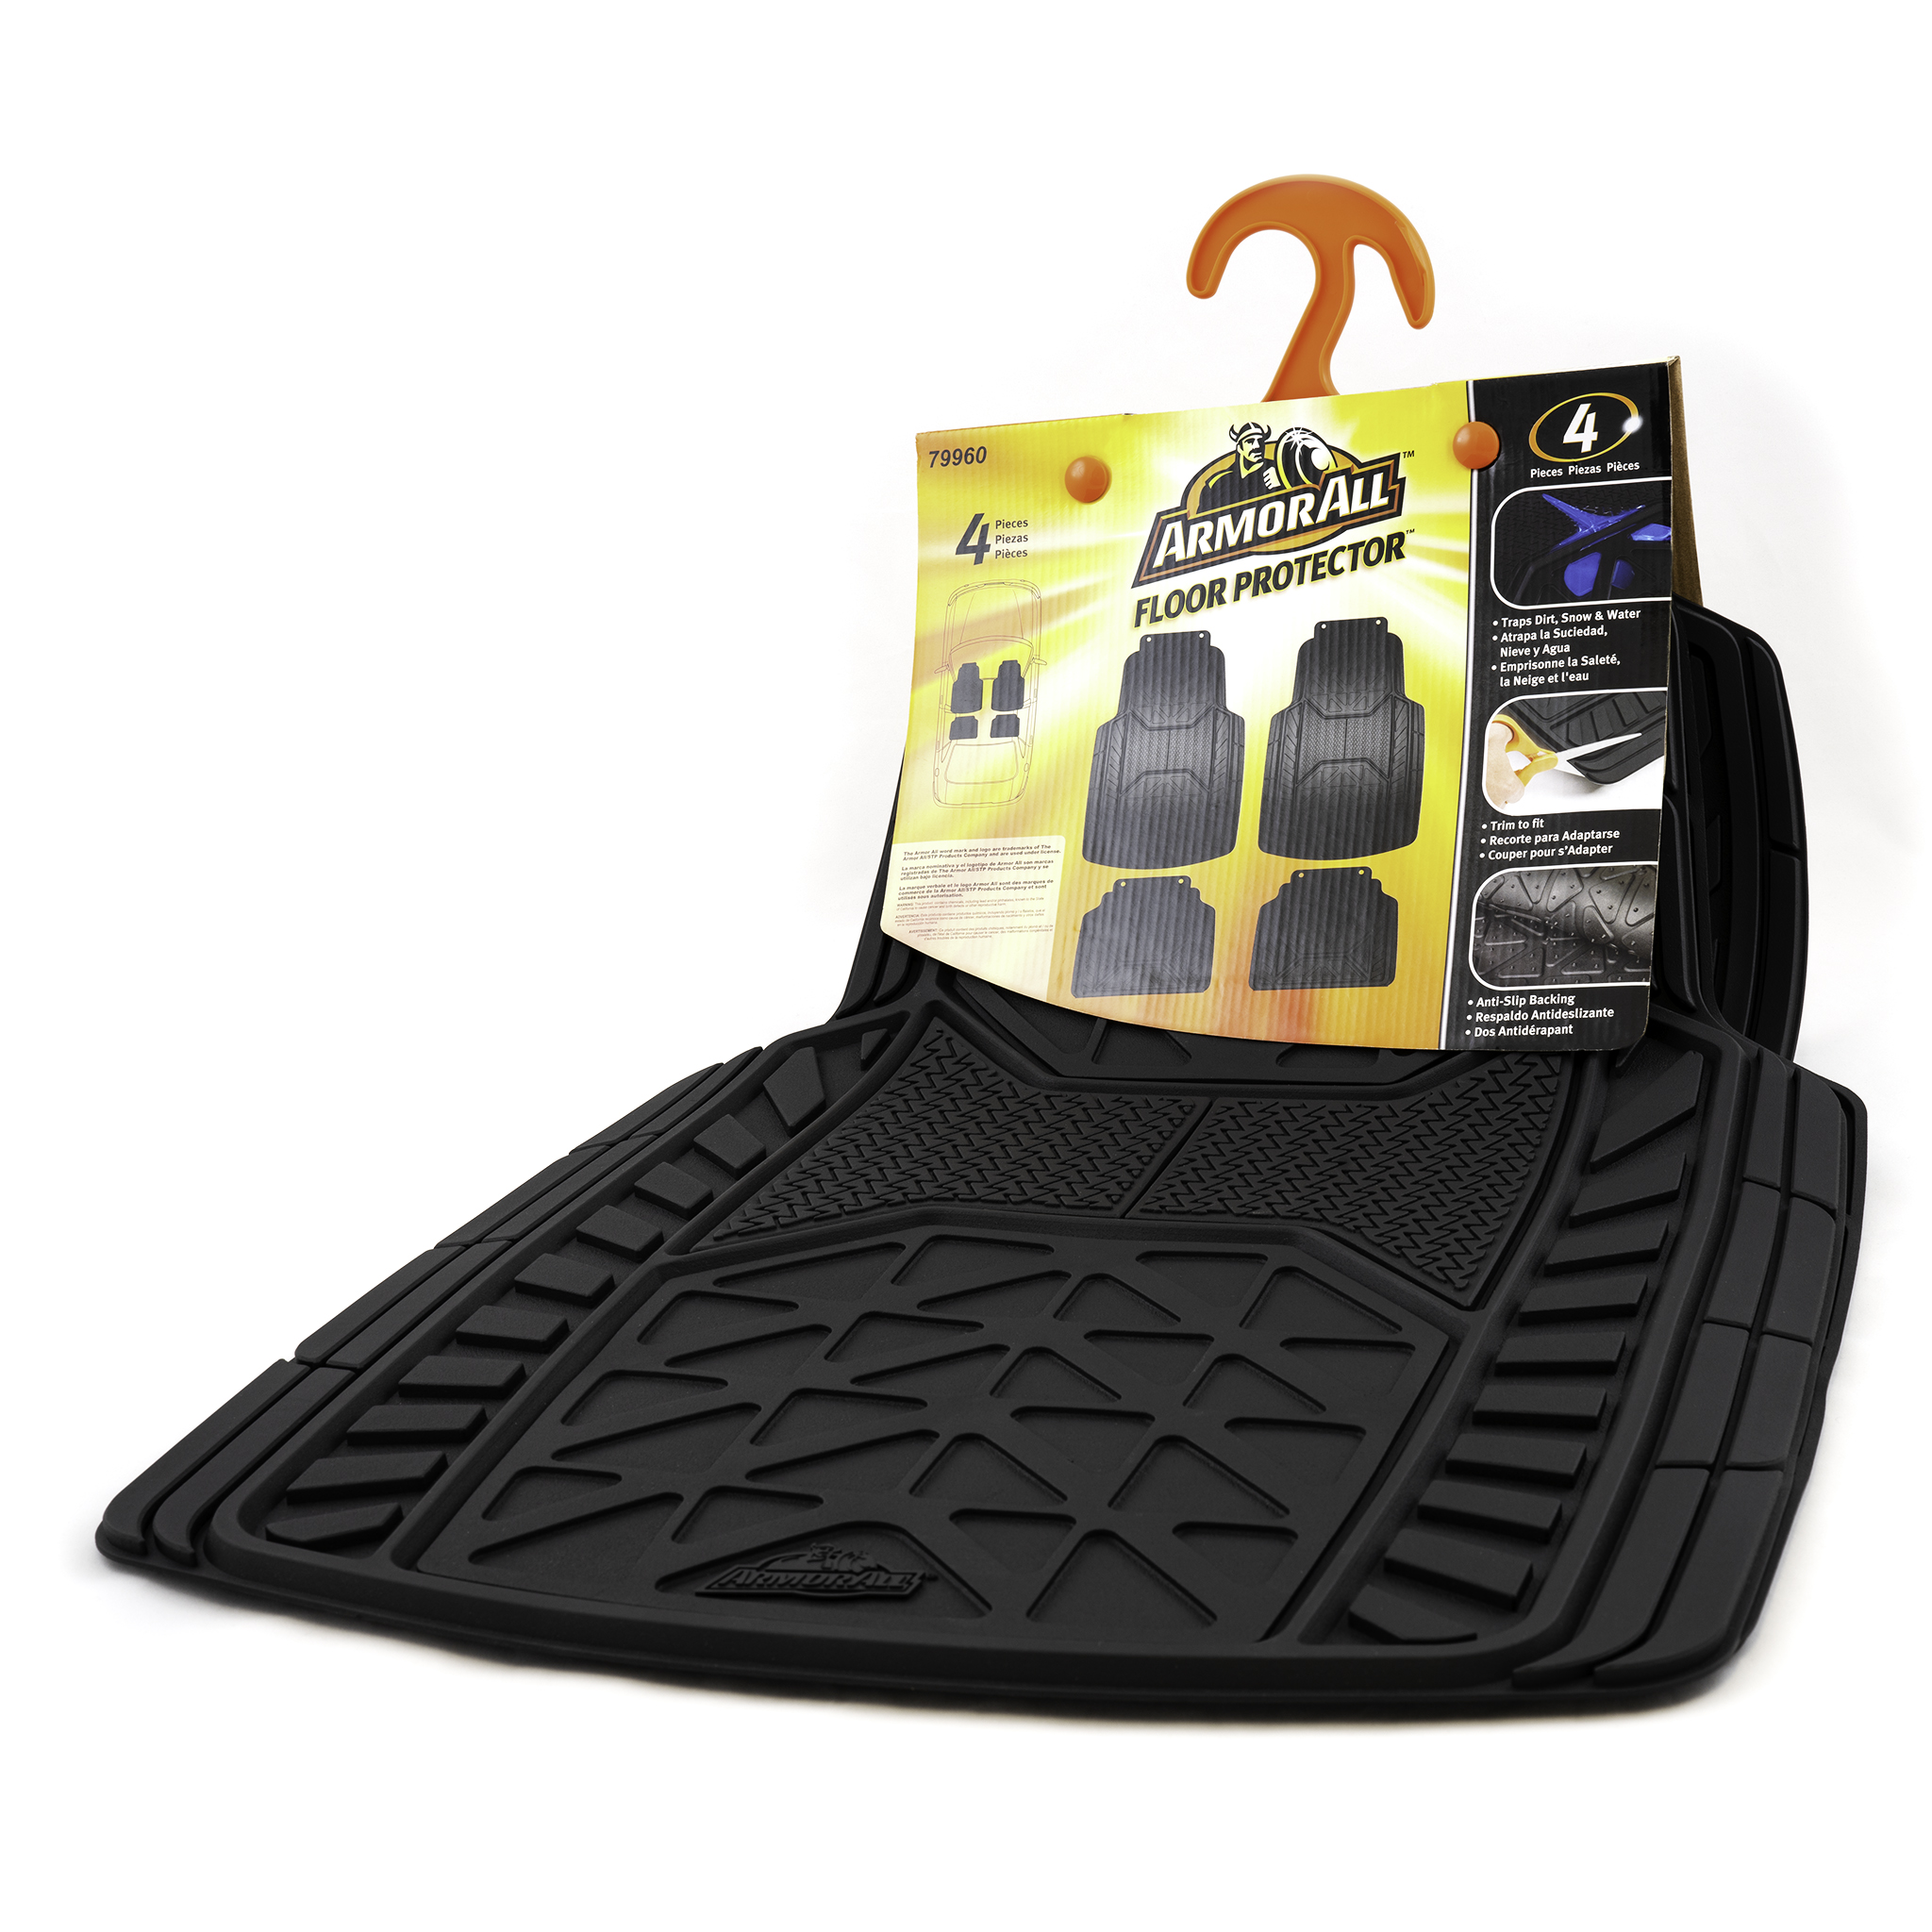 Armor All Floor Mats - Packaging Front Three Quarter View Cropped.jpg